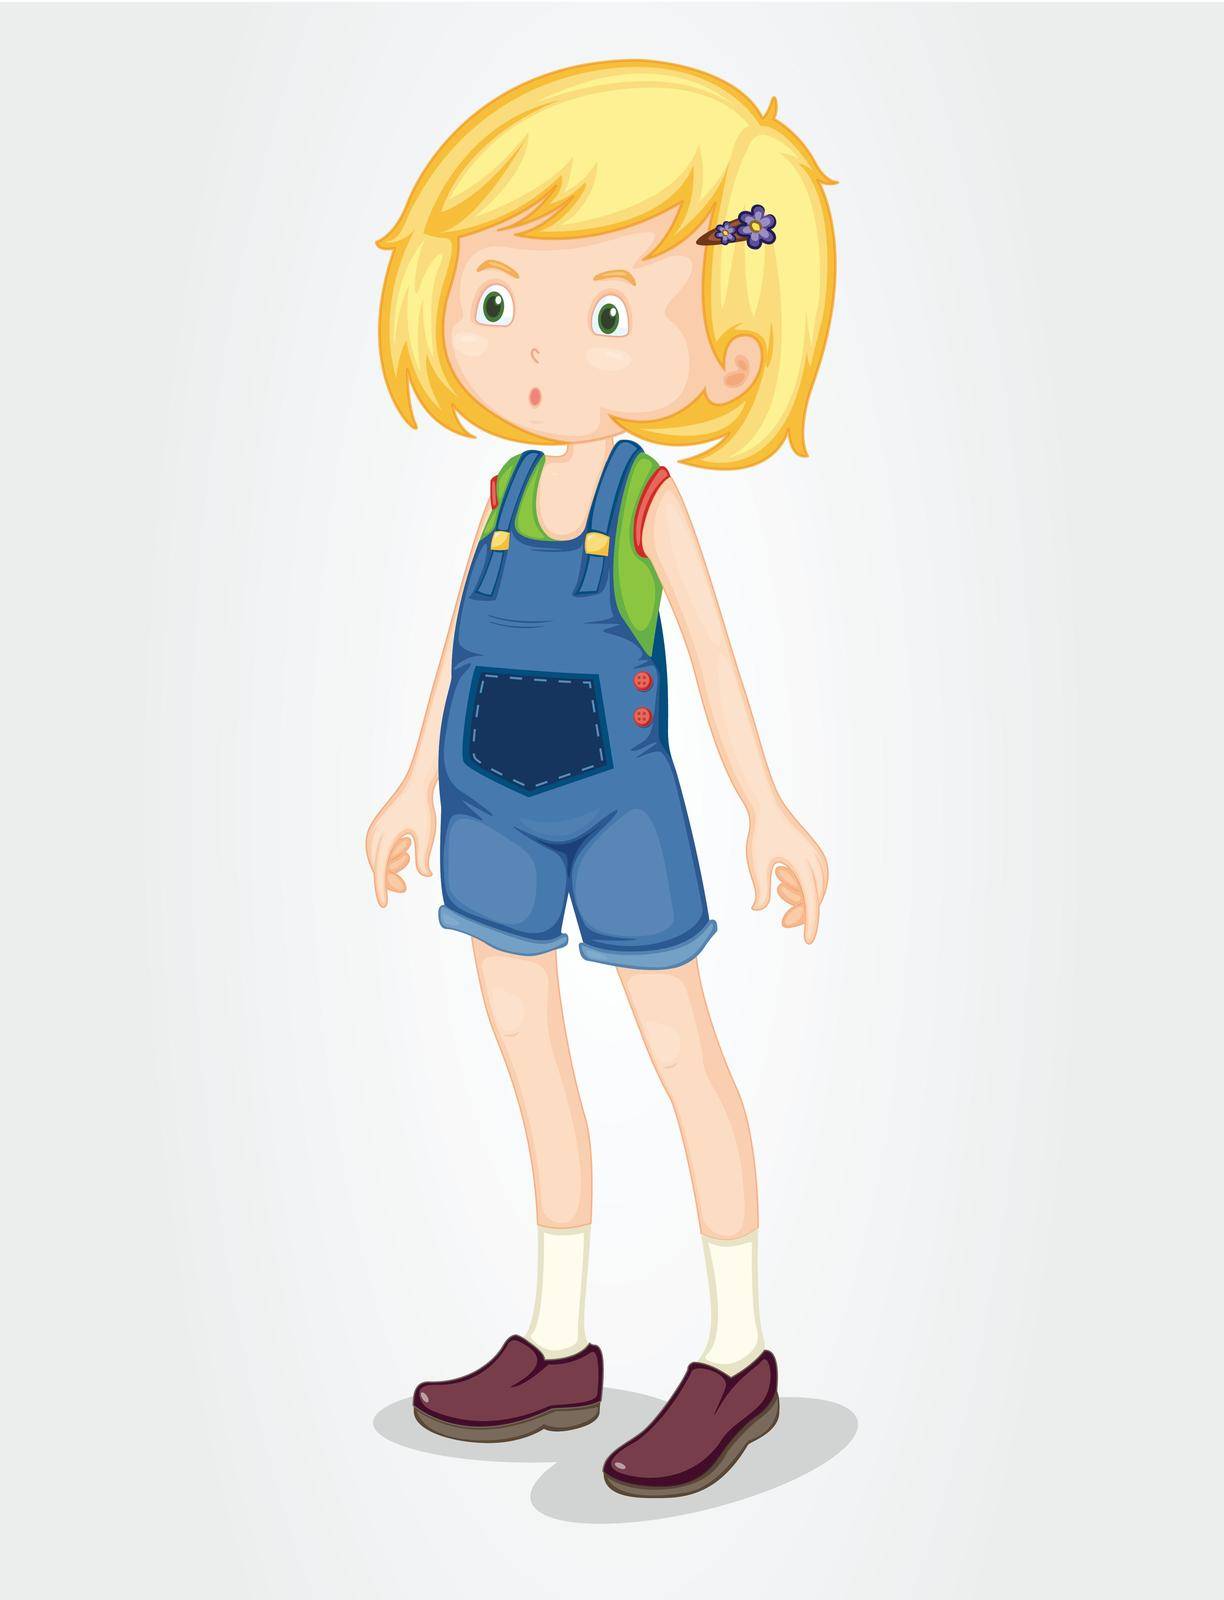 Illustration of a young girl wearing overalls